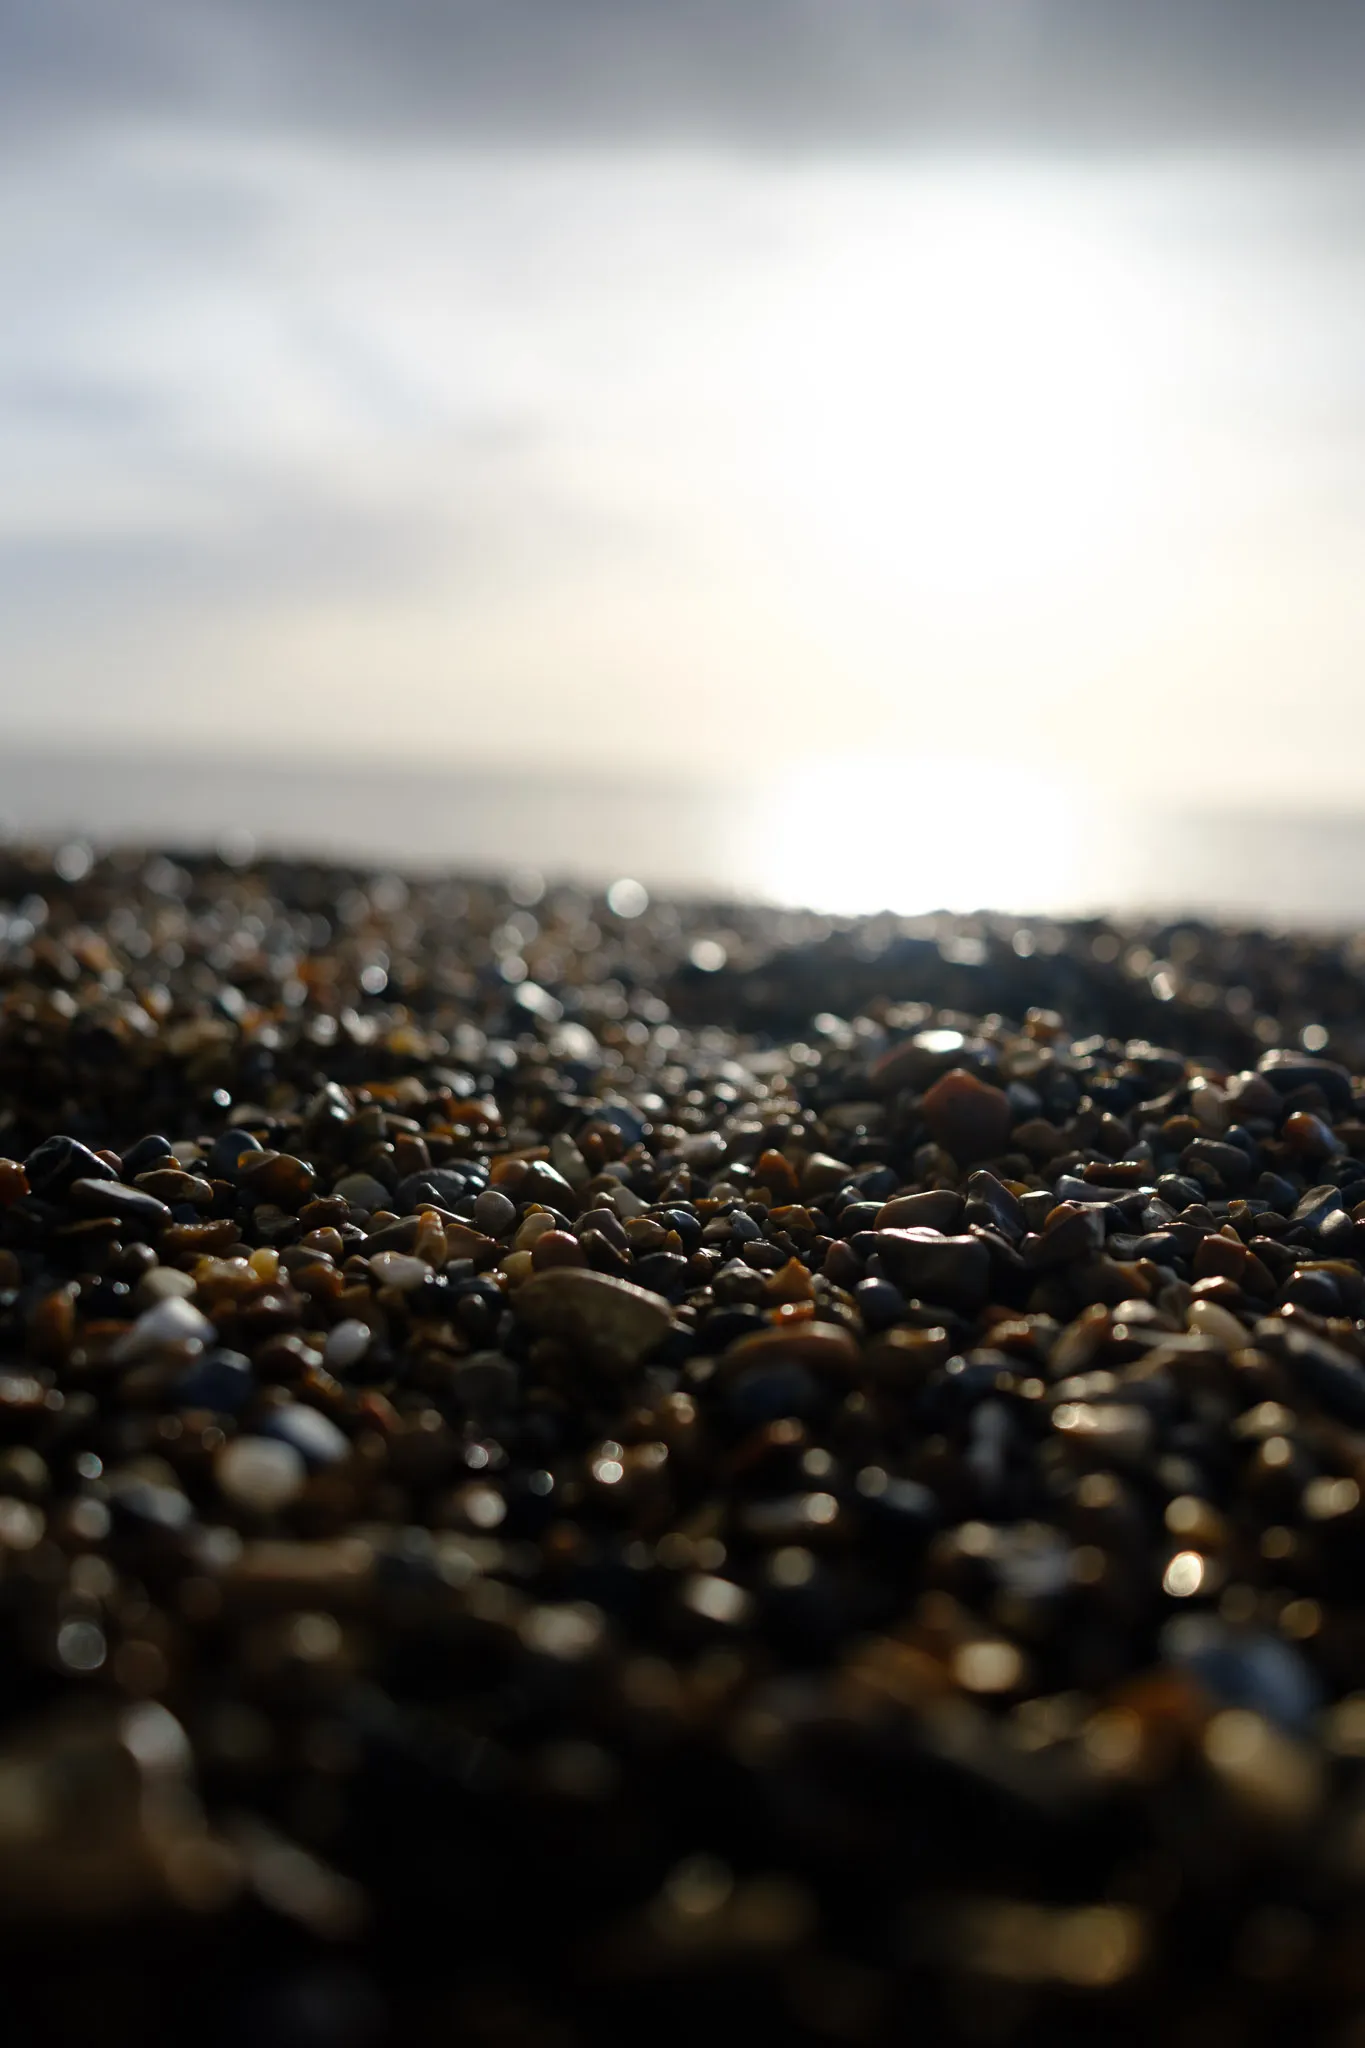 close-up, in-focus shot of a beach filled with pebbles and the bright sky in the background.